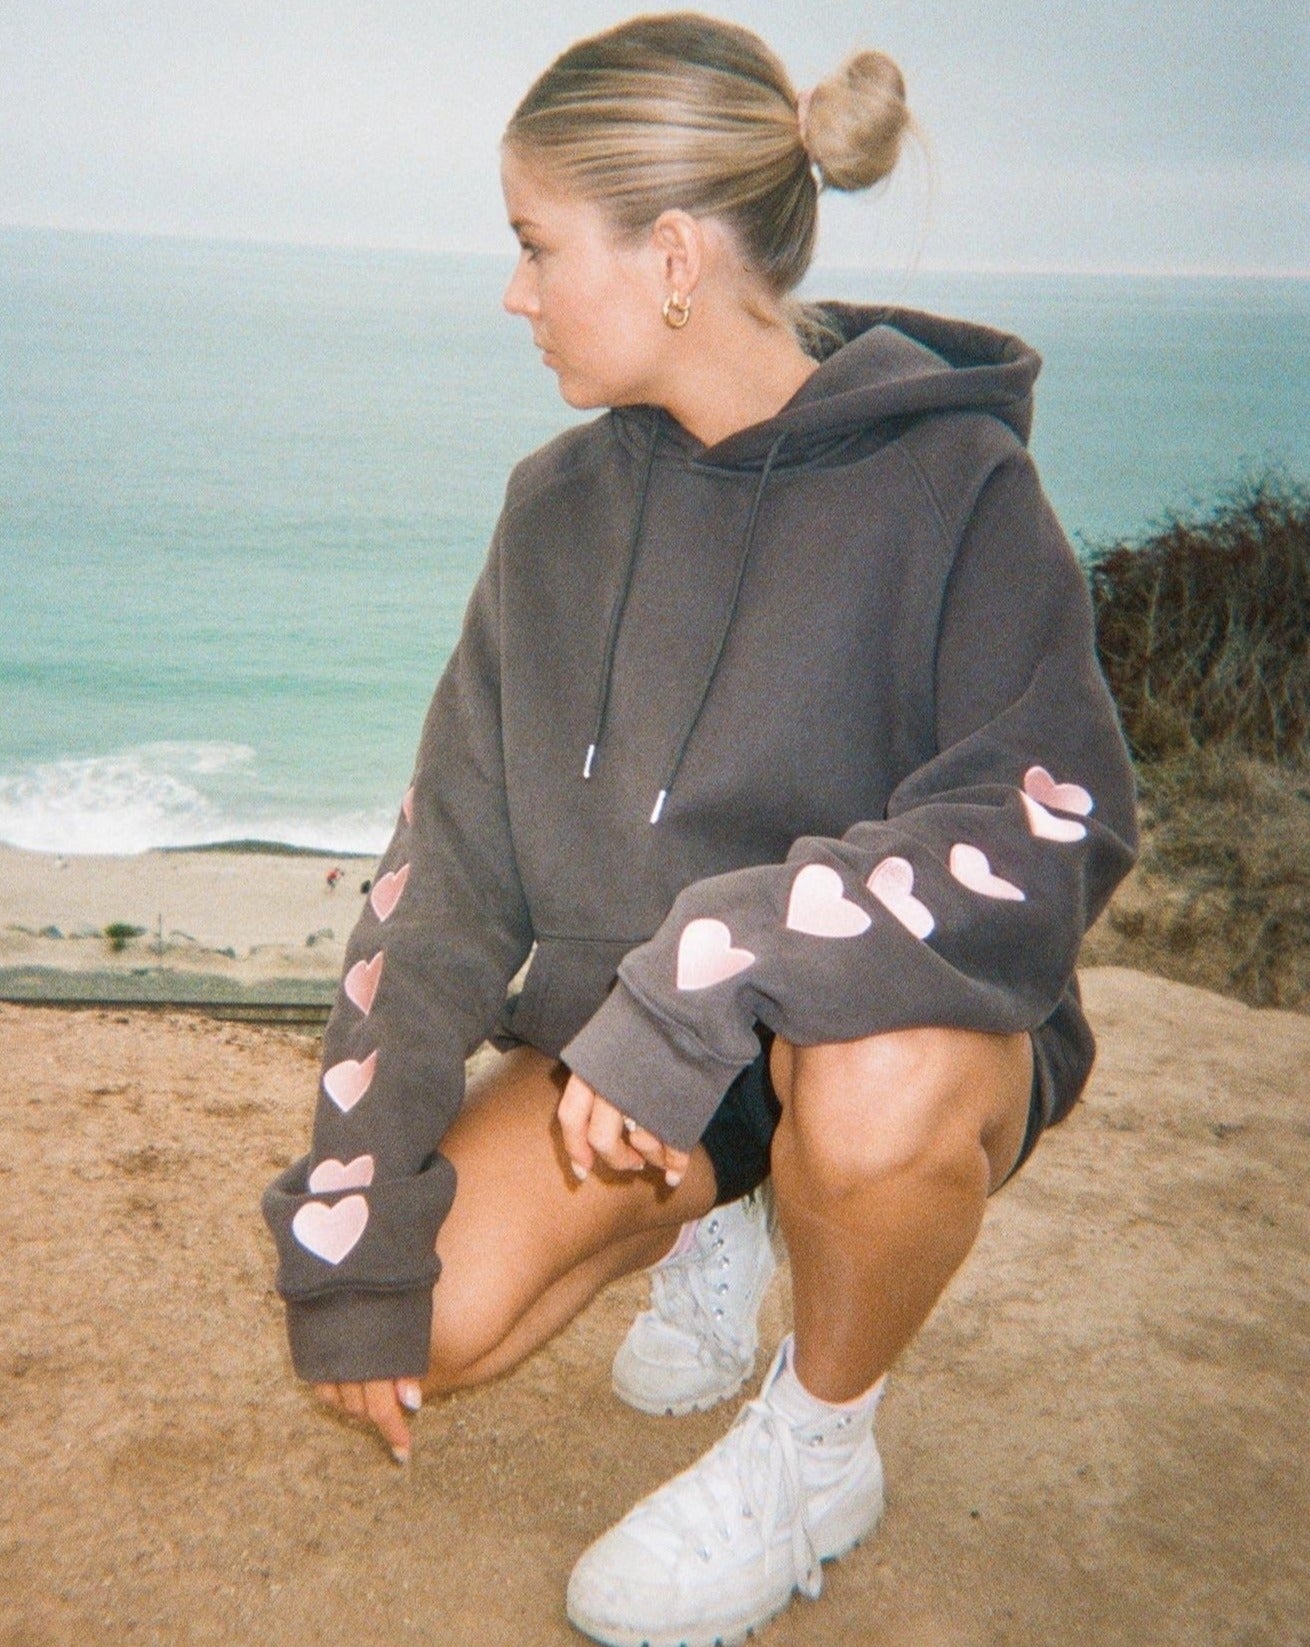 Gift Giving Oversized Lux Hoodie in Heather Gray